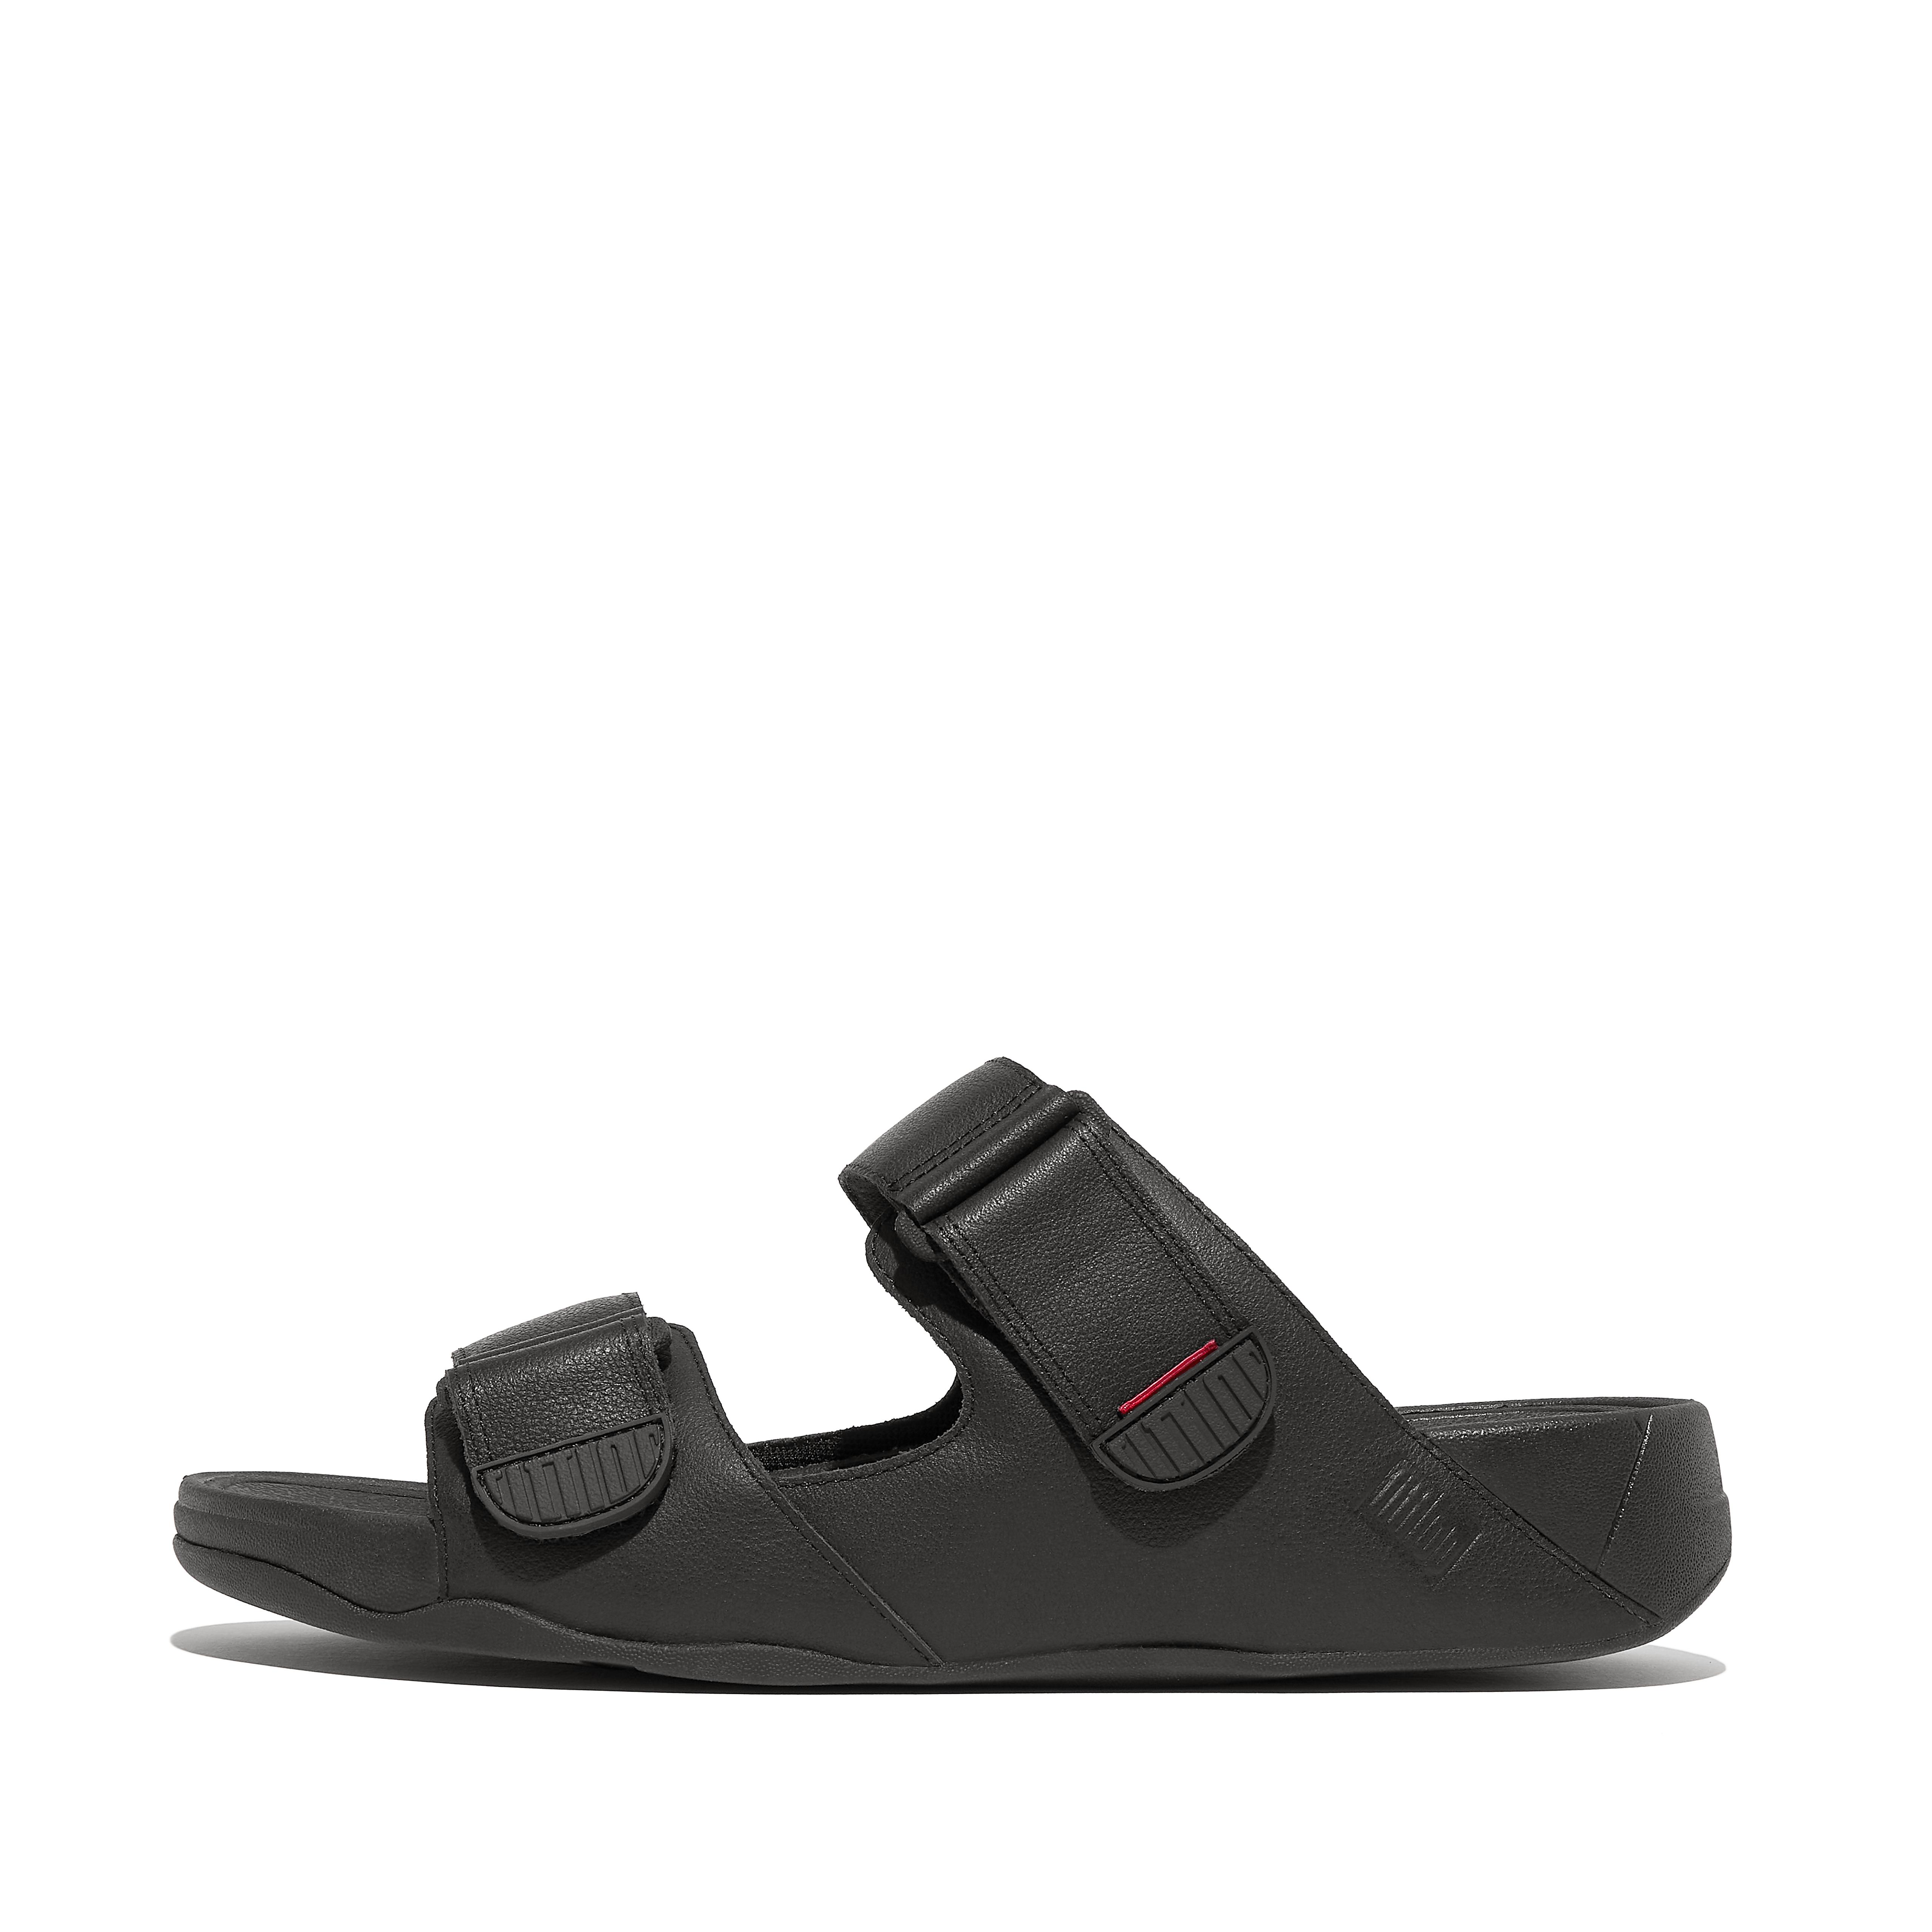 leather casual sandals